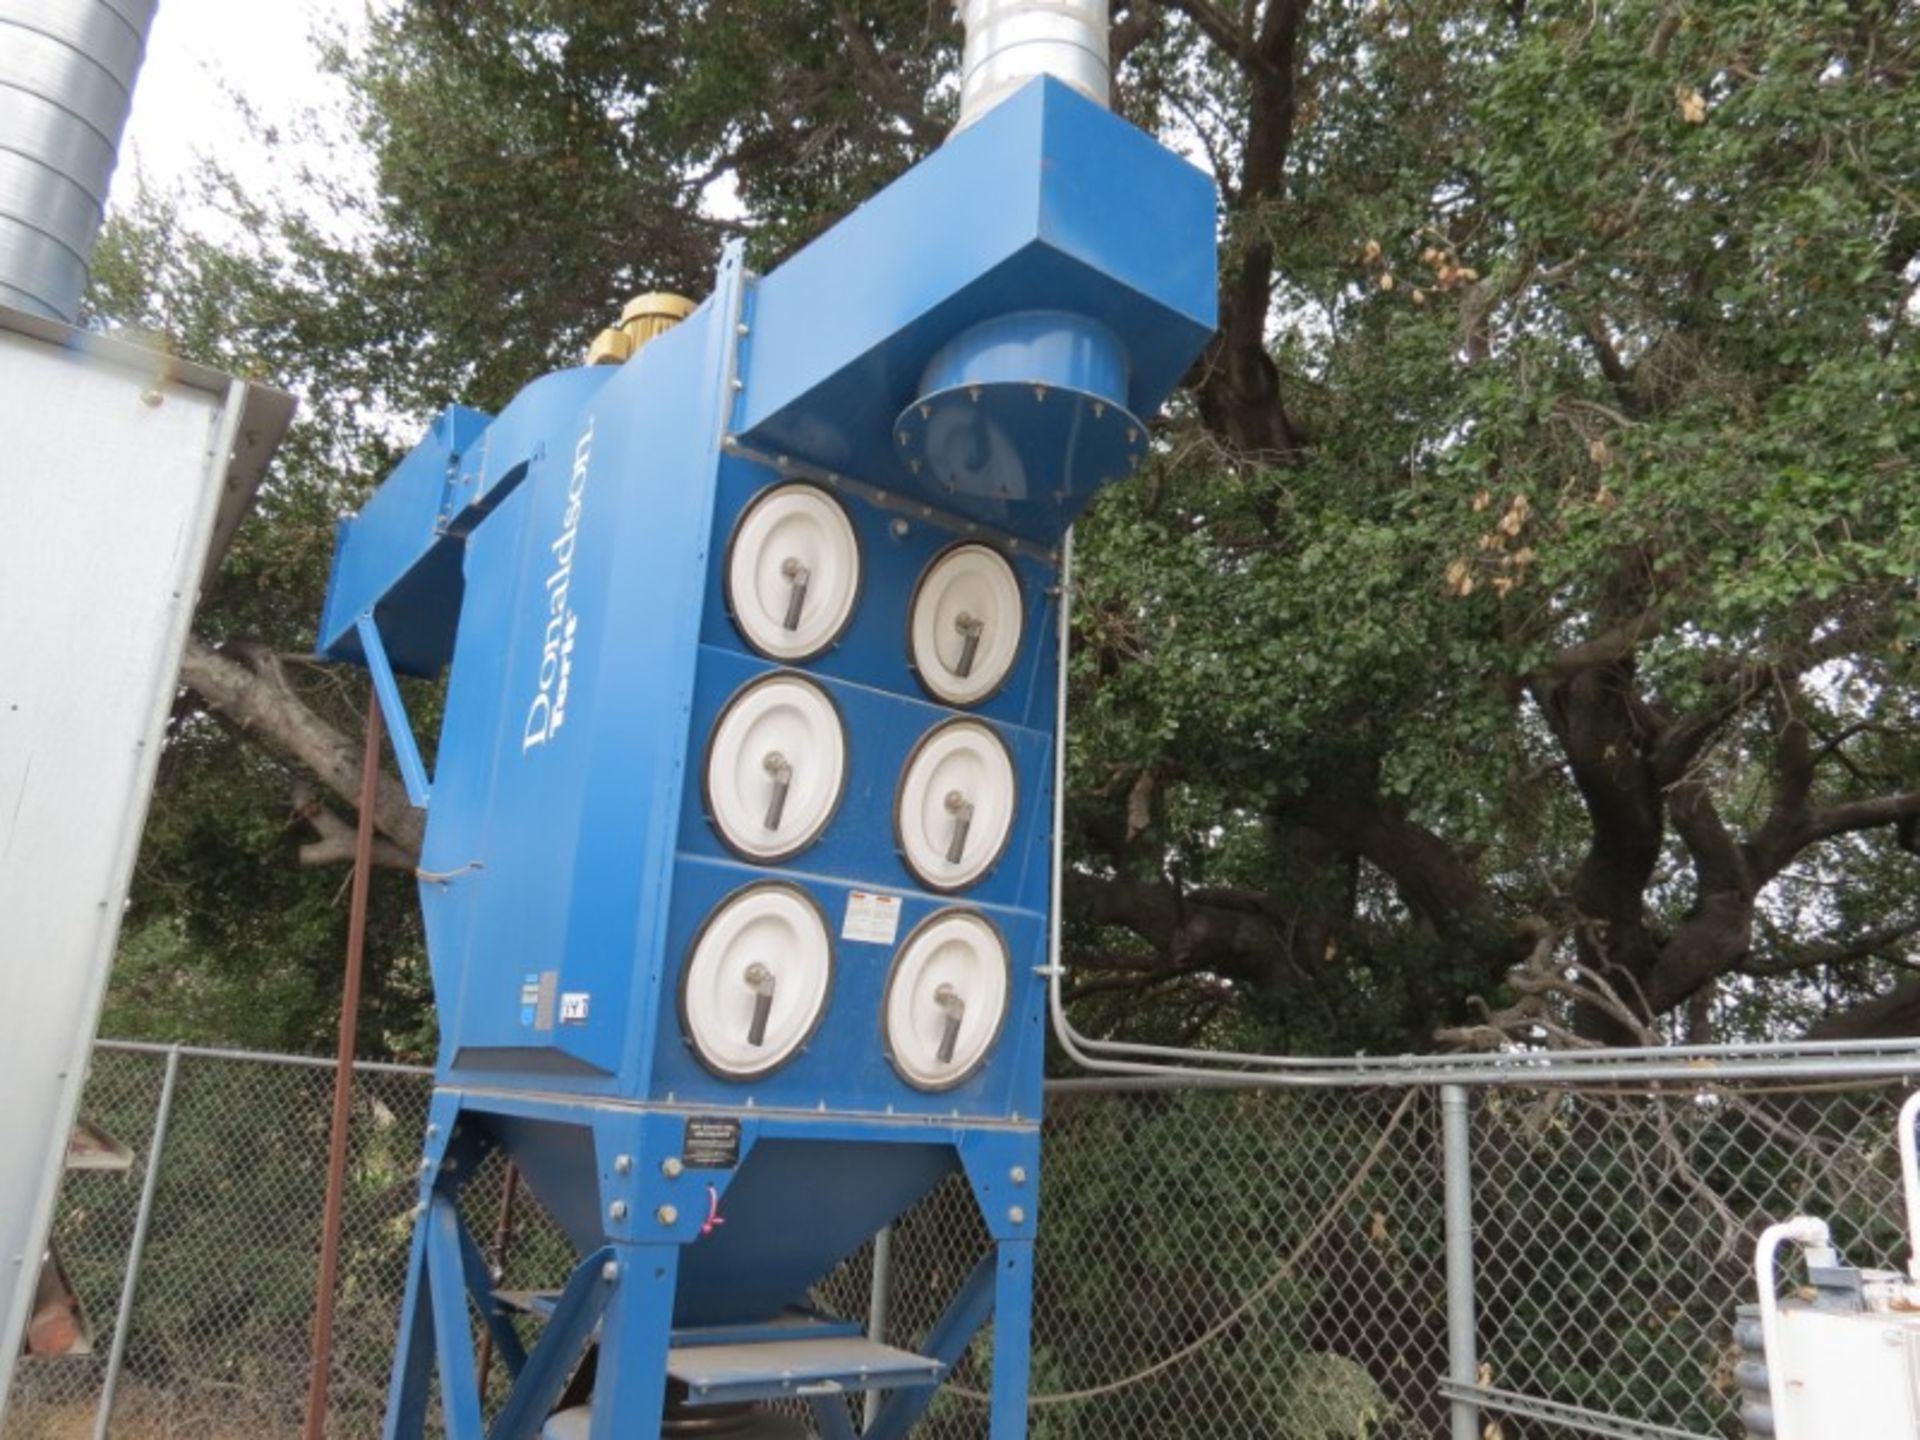 Donaldson 15 HP Torit Dust Collector System m/n DF03-12 S/N 10093379-L1 (Located in Simi Valley, CA) - Image 2 of 5